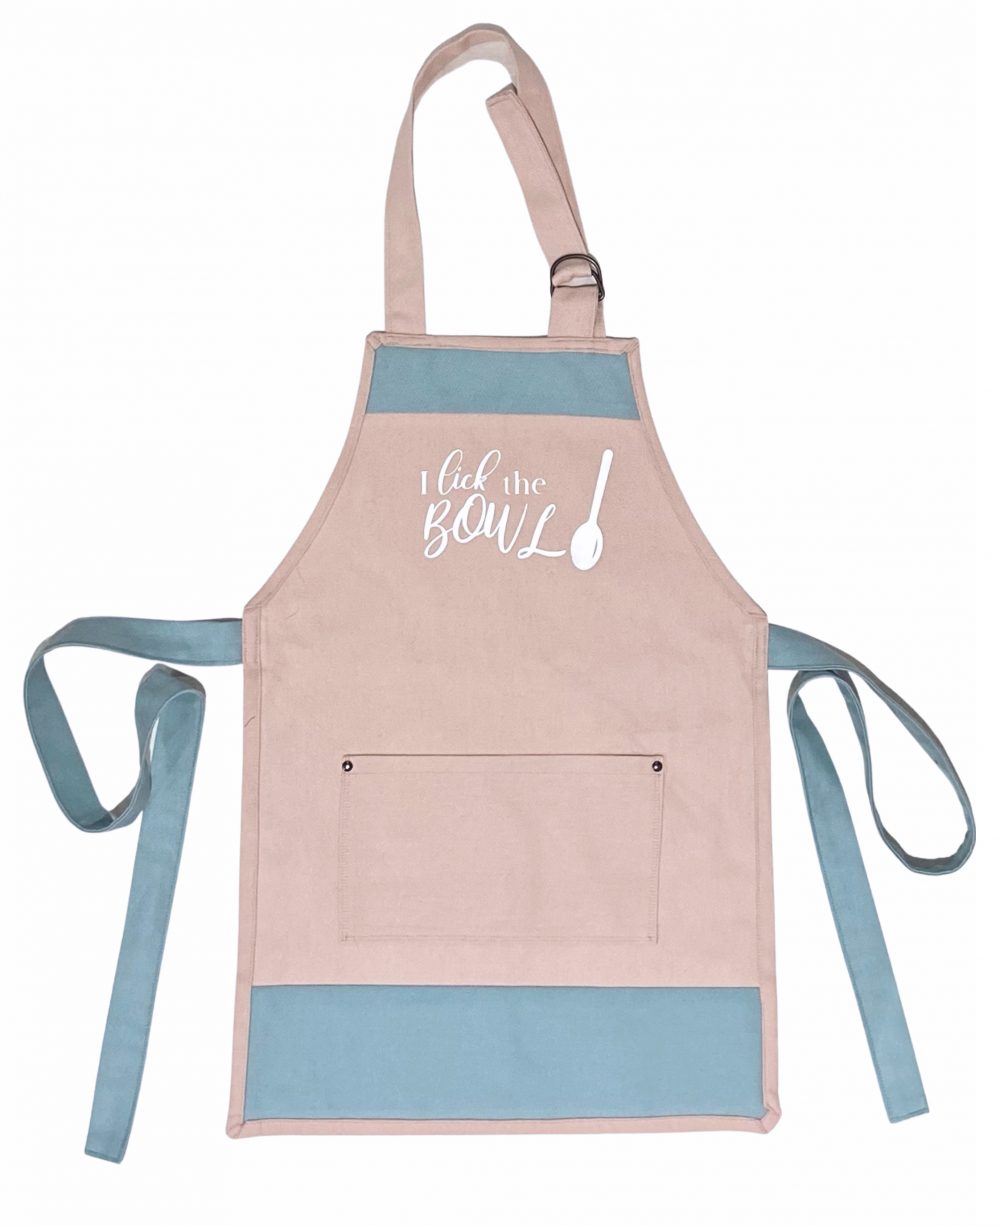 "I Lick The Bowl" Pale Pink Apron with Duck Egg